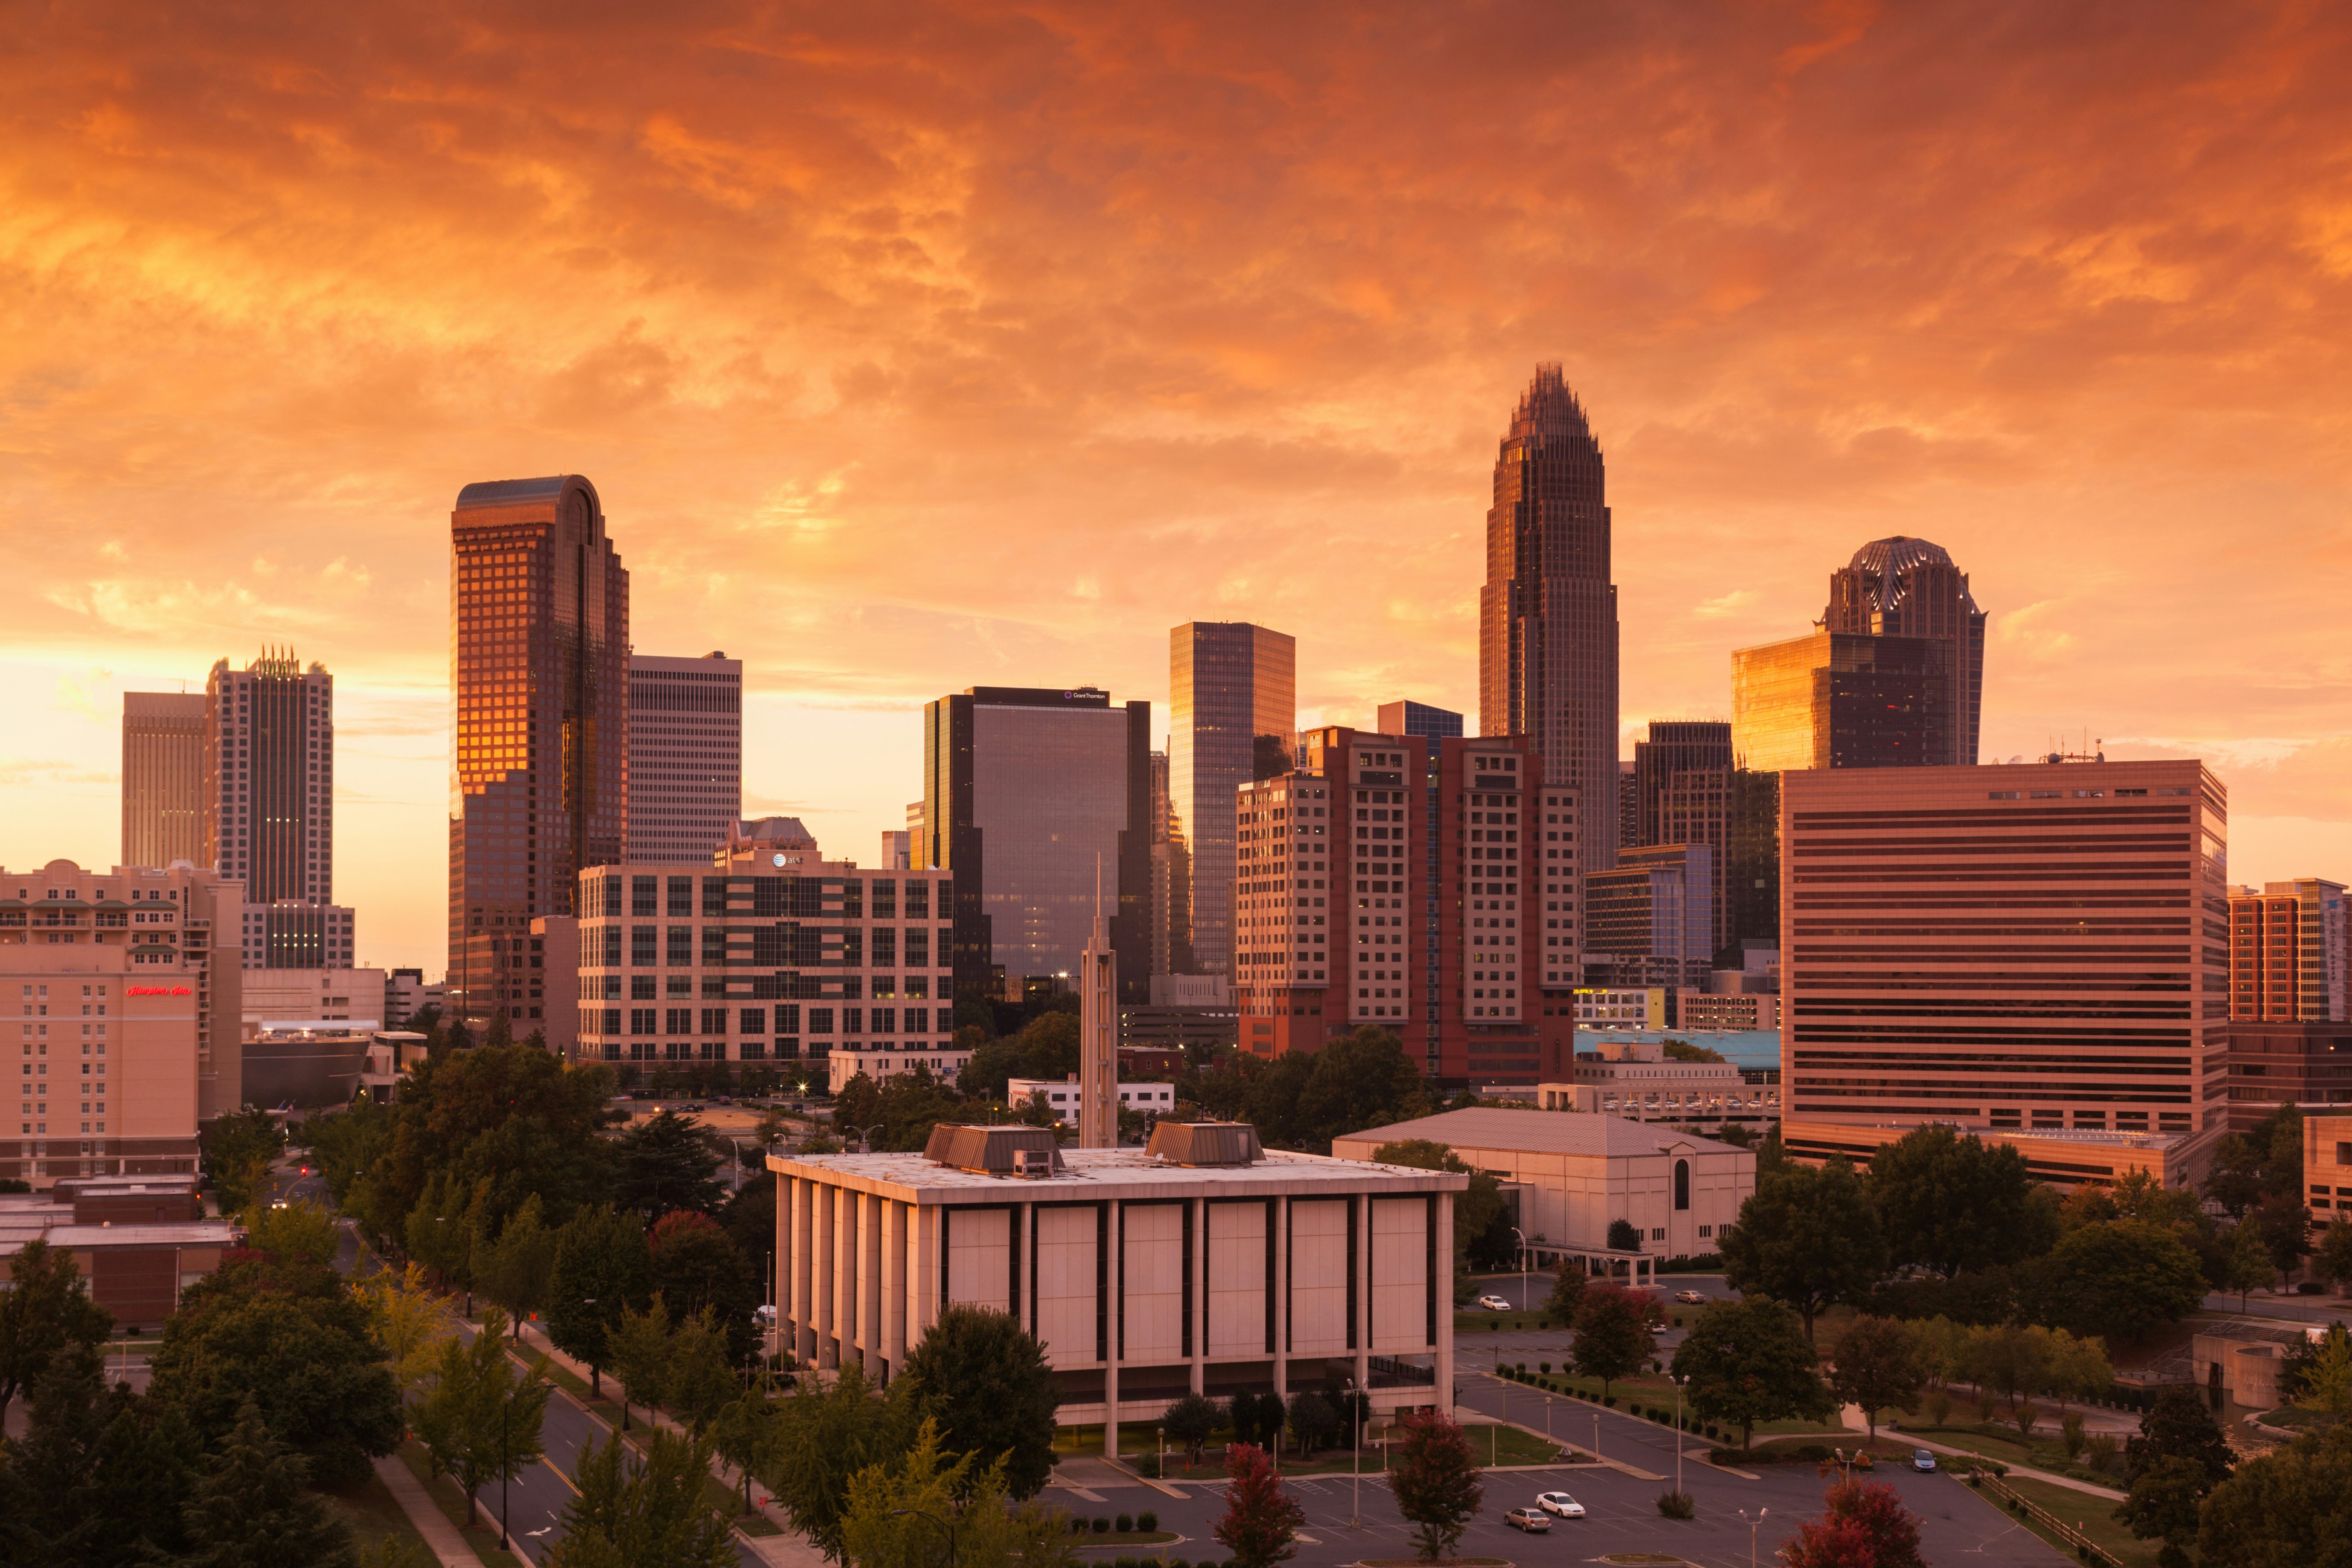 A sunset view of the Charlotte skyline